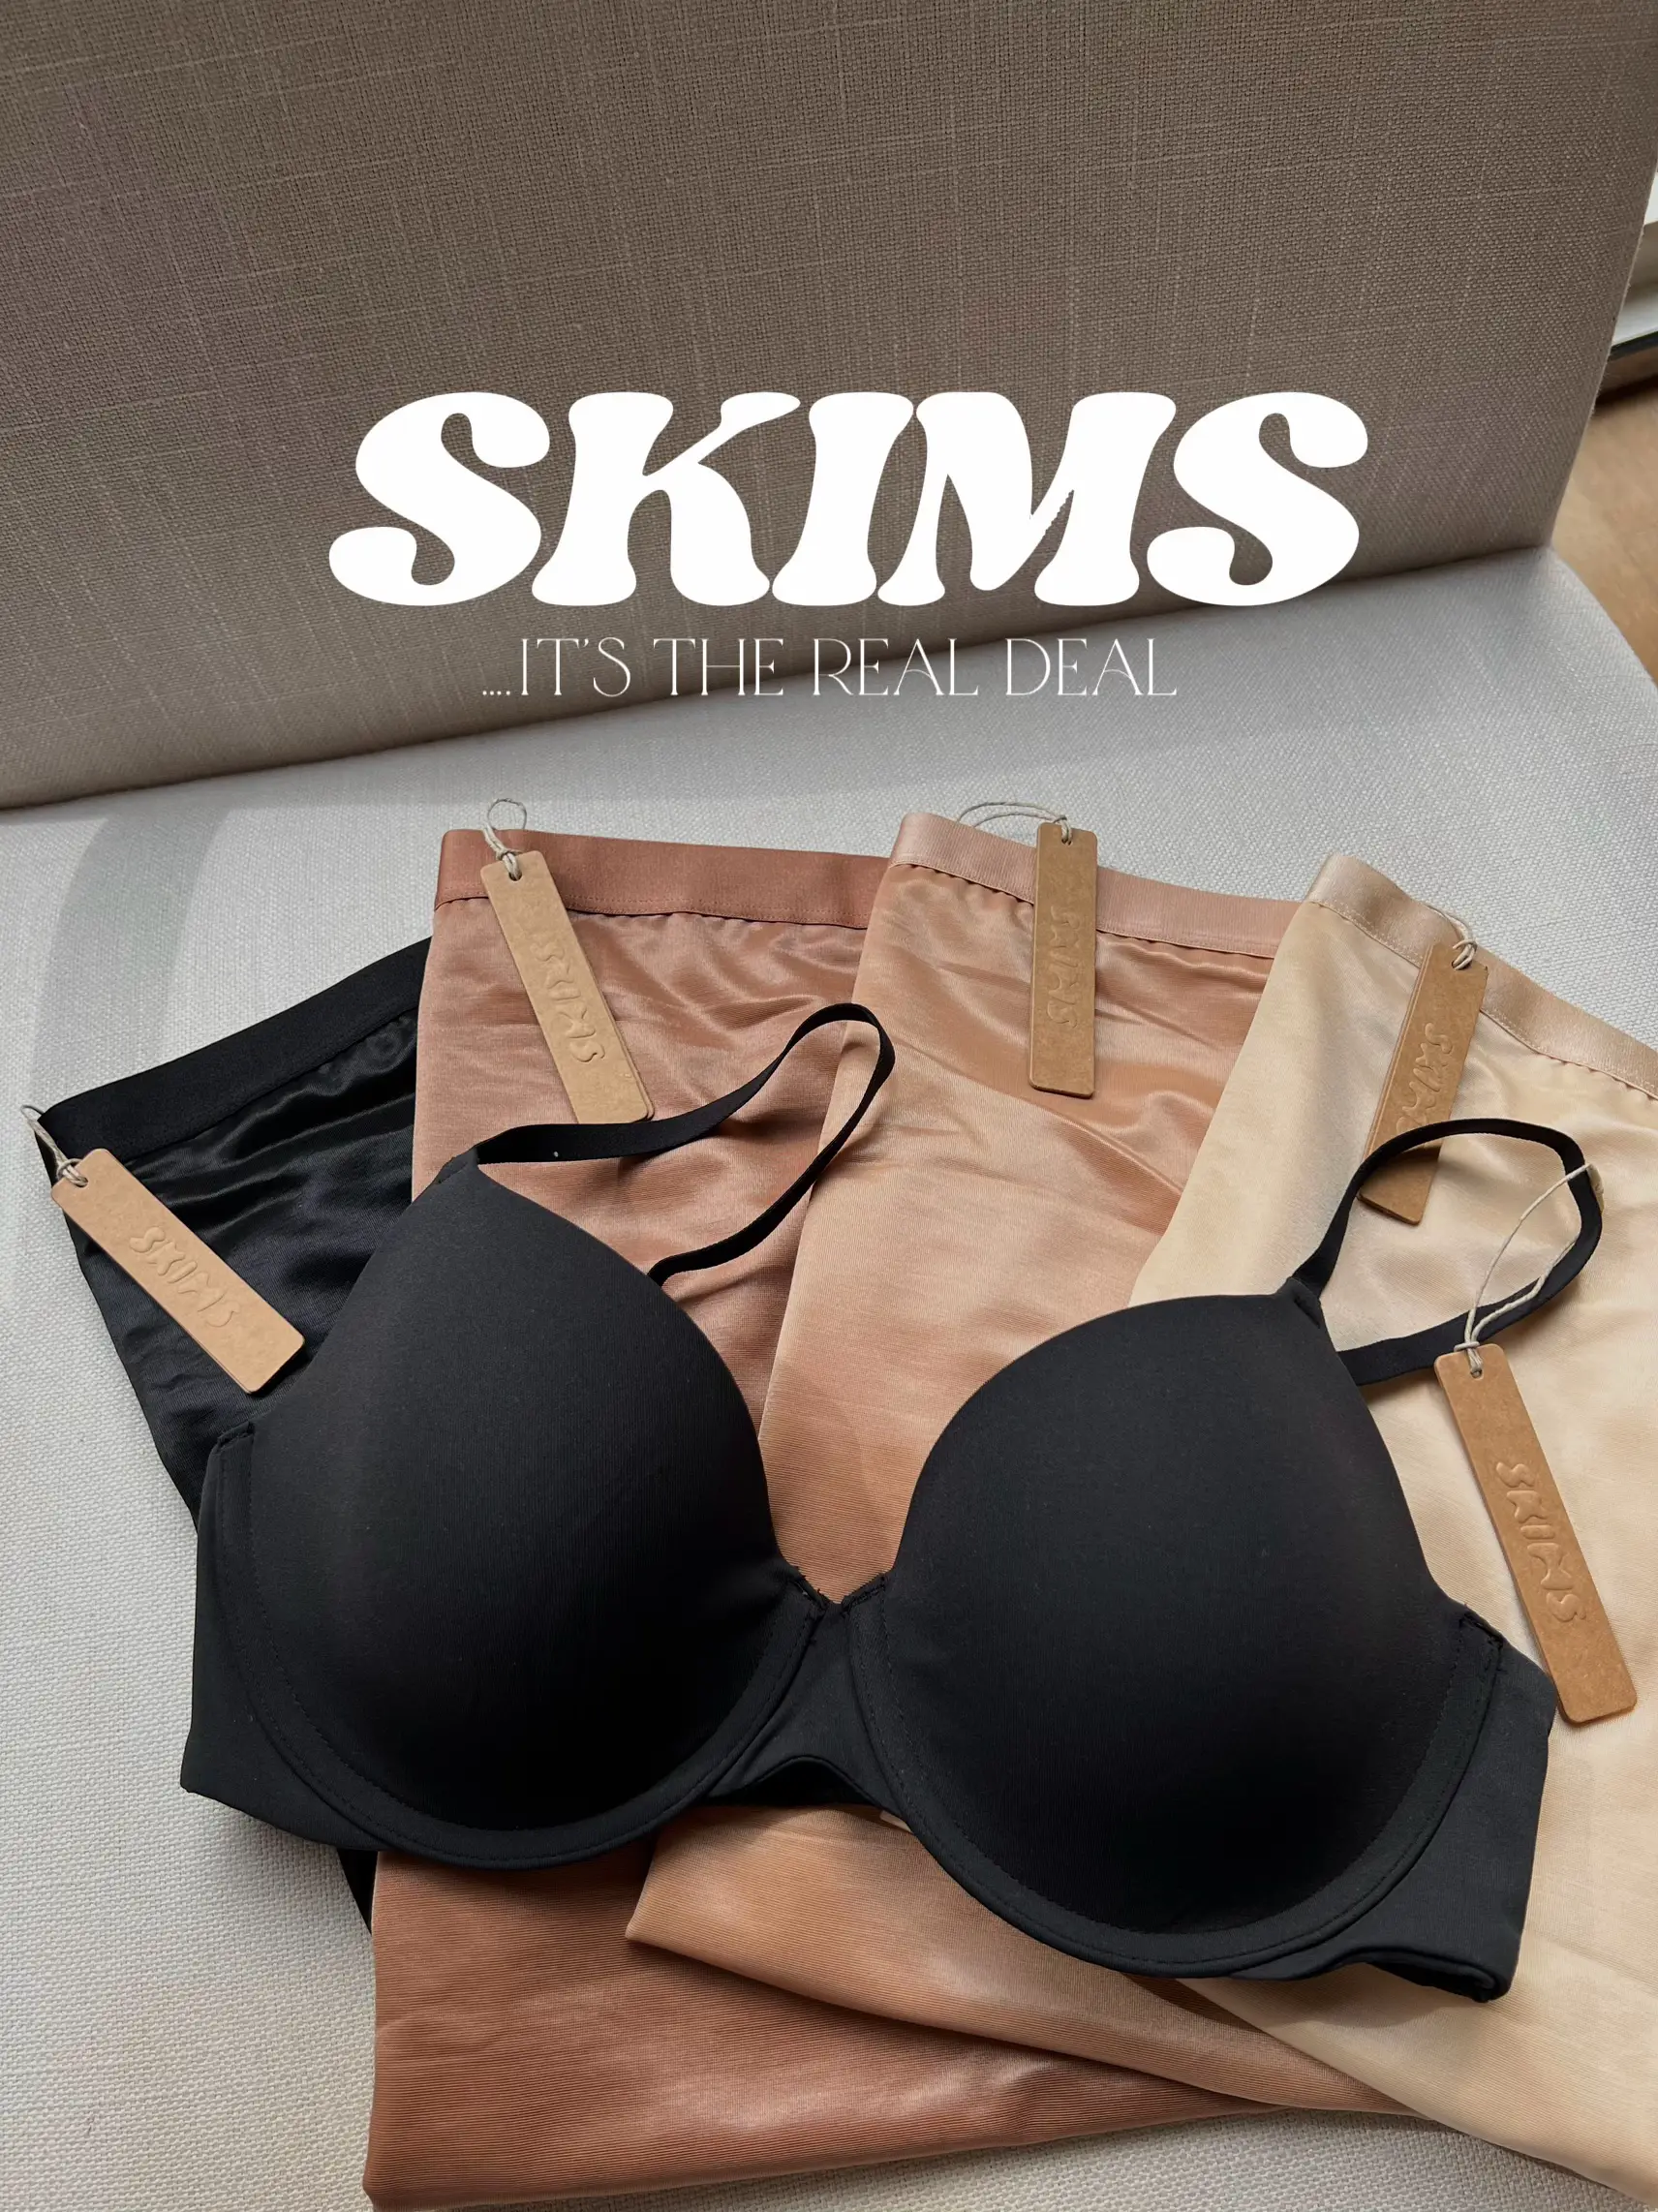 We Tried On Skims's Best-Selling Bra and Underwear—Read Our Honest Reviews